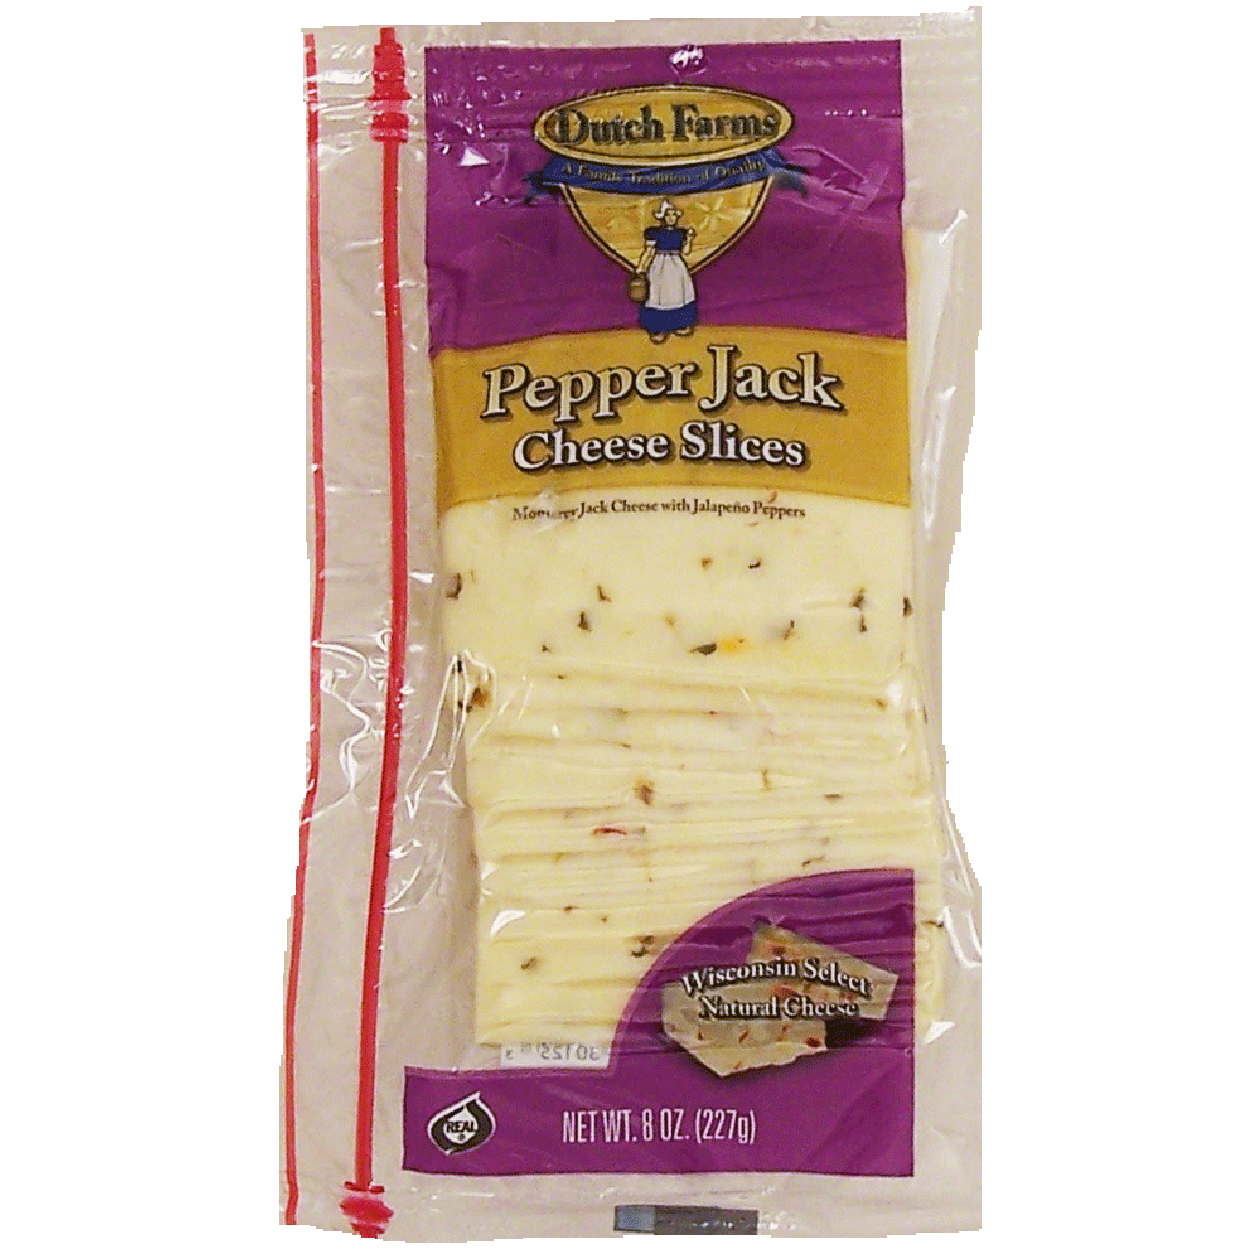 Dutch Farms Pepper Jack monterey jack cheese with jalapeno peppers,8oz ...